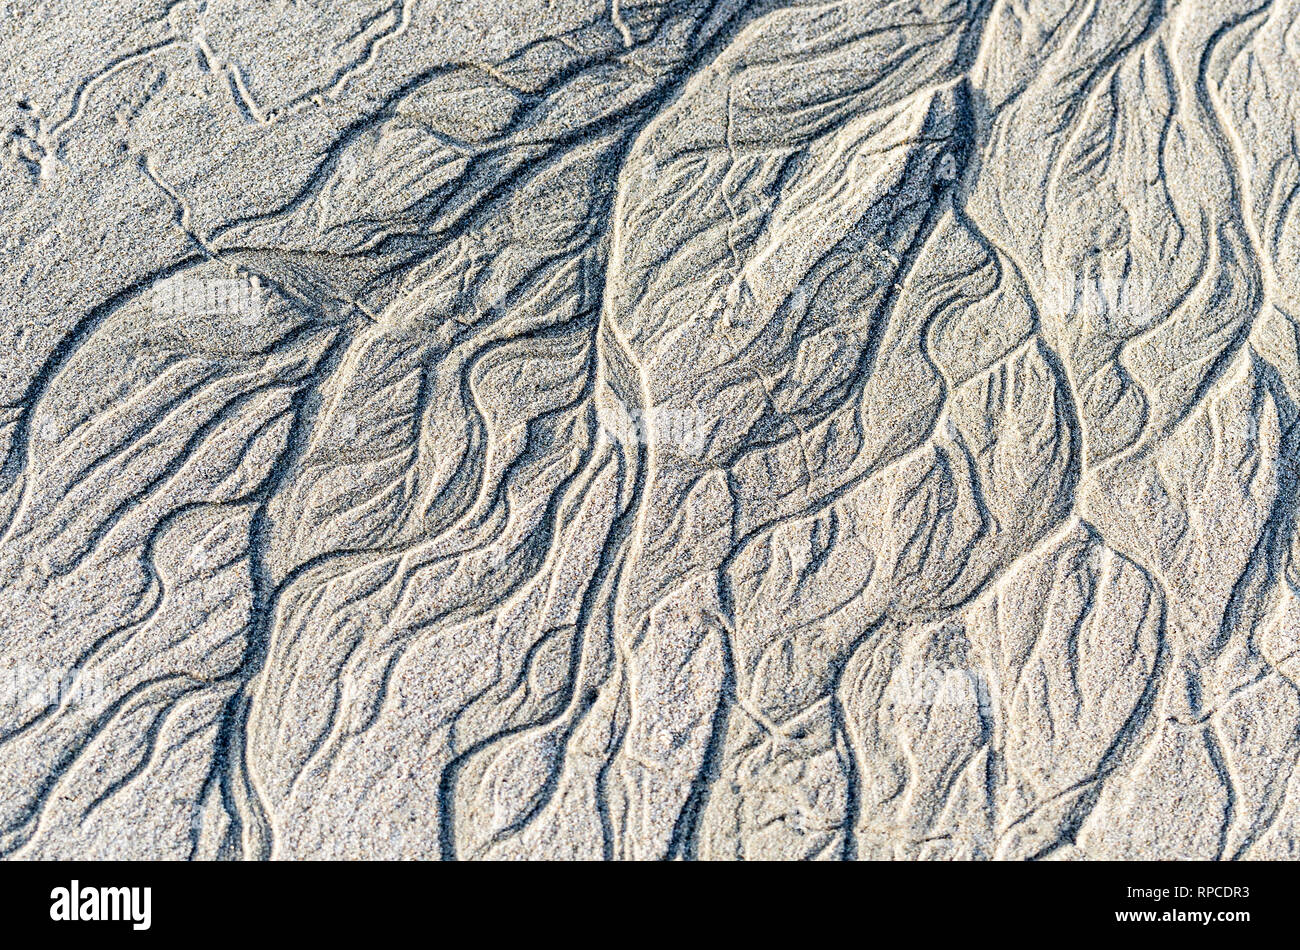 Beach patterns caused by the retreating tide. Stock Photo